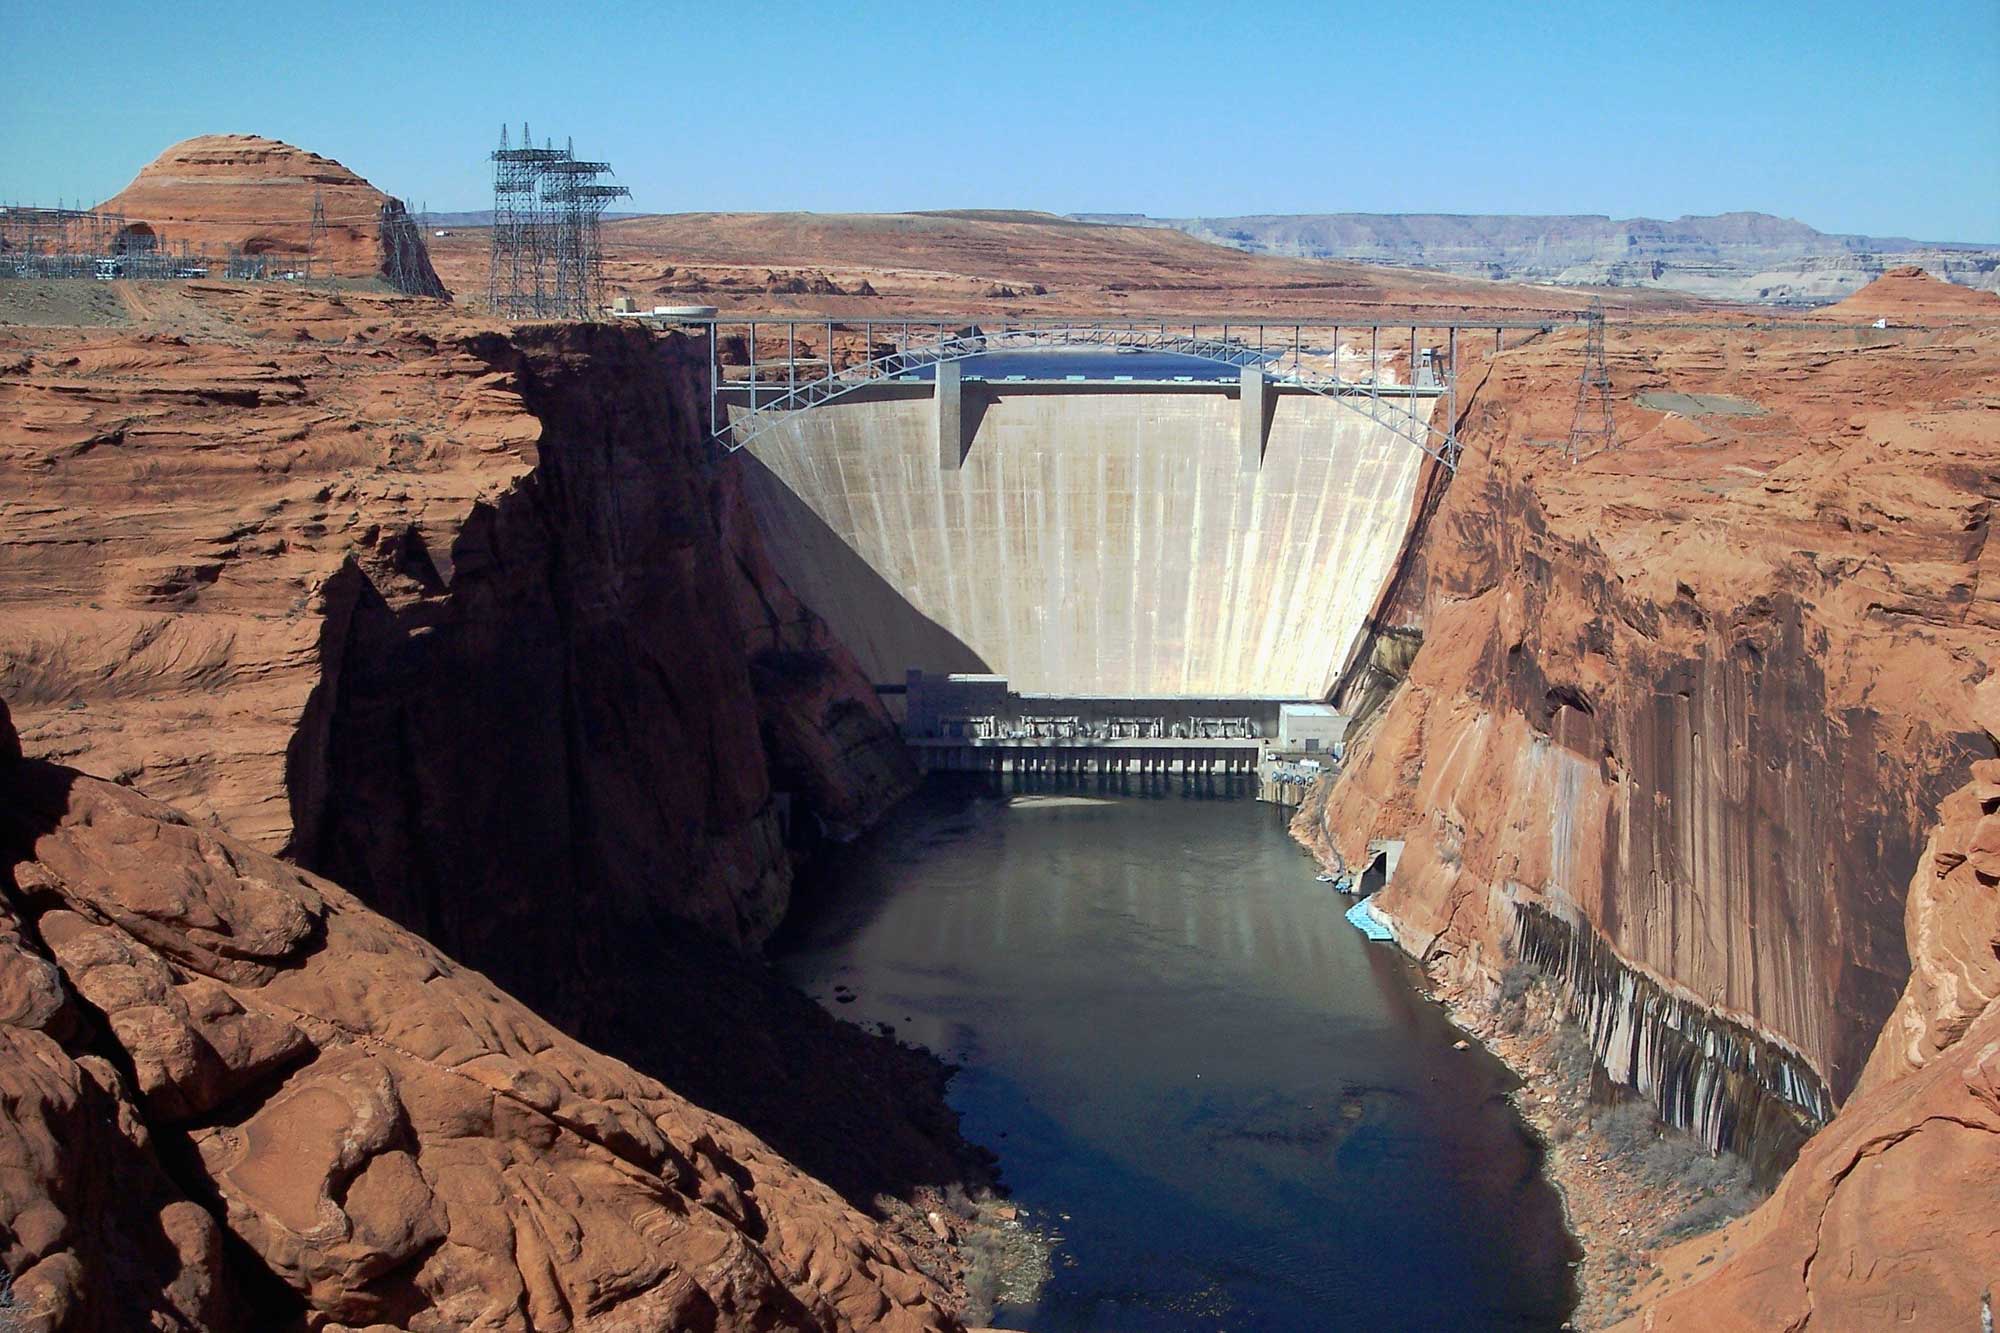 Photograph of Glen Canyon Dam in Arizona. The dam is a tall concrete structure spanning a canyon made up of red rocks. The lake behind the dam can barely be seen. In front of the dam, water level is low. A bridge spans the canyon in front of the dam.